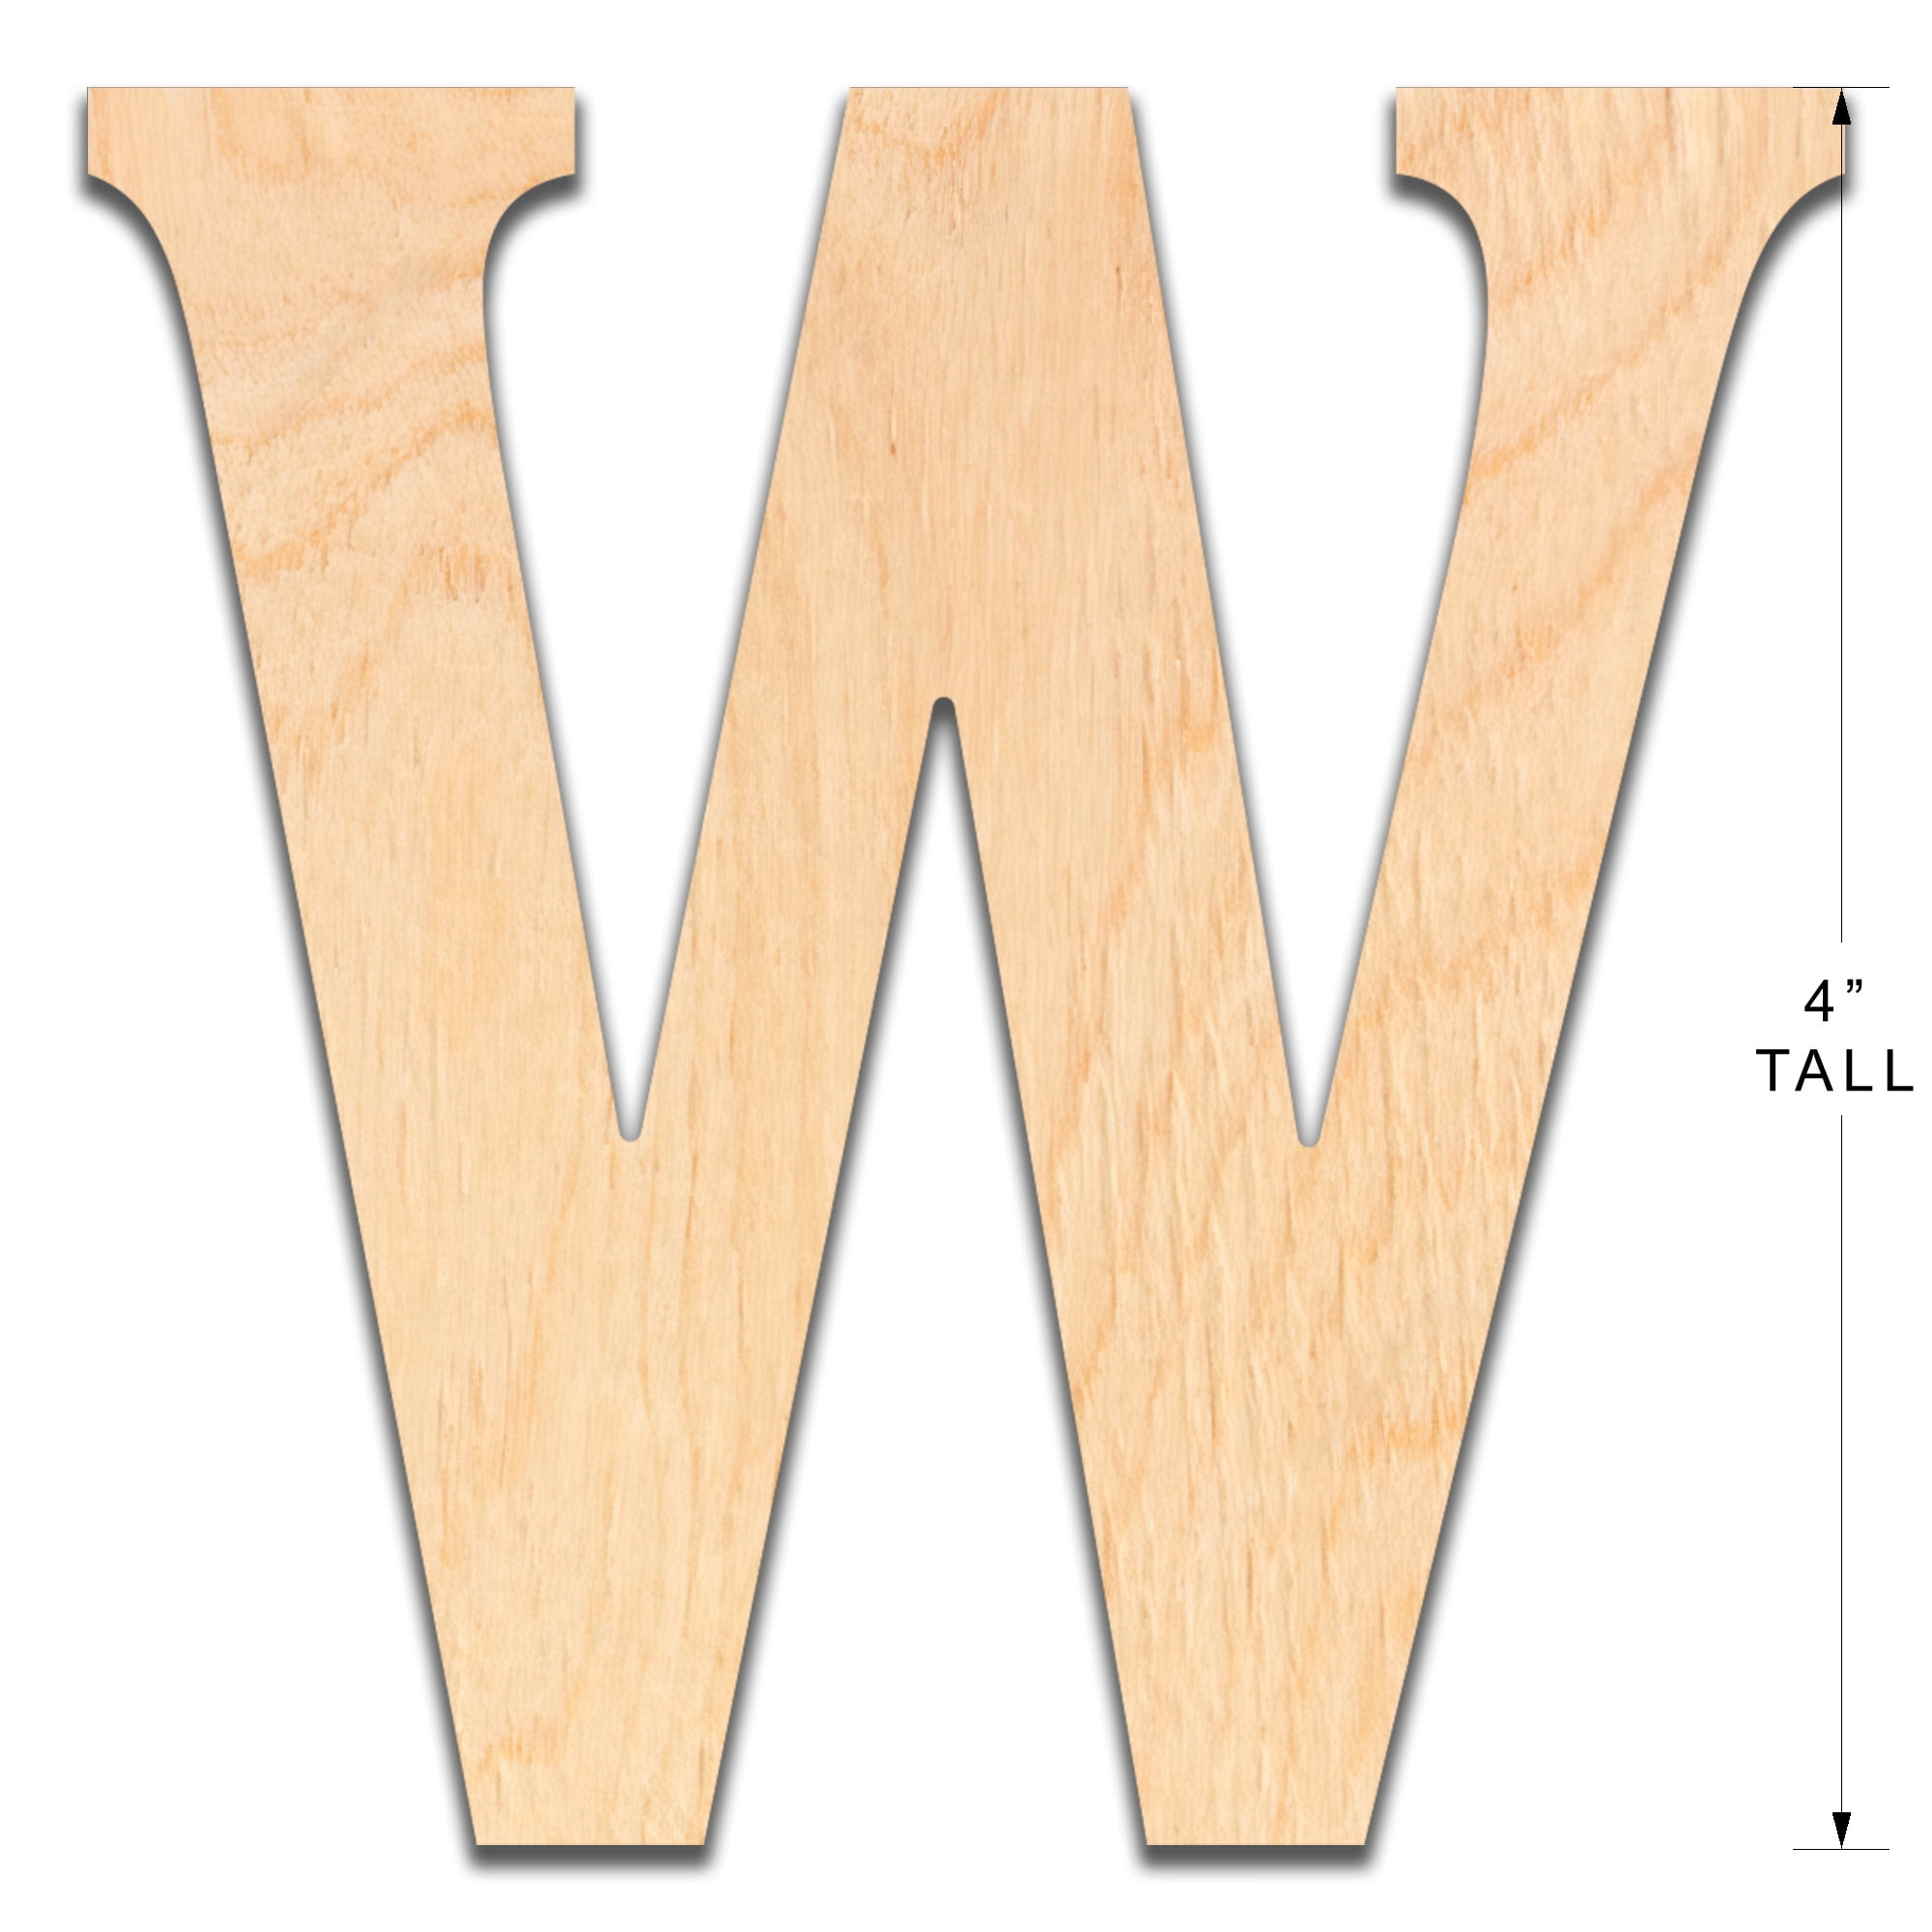  4 Inch Wooden Letter T - Cut from Baltic Birch Plywood, This 4  inch Wood Letter is Ready for Painting or Decorating. for Home Decor,  Office Signs, or Party Decorations.